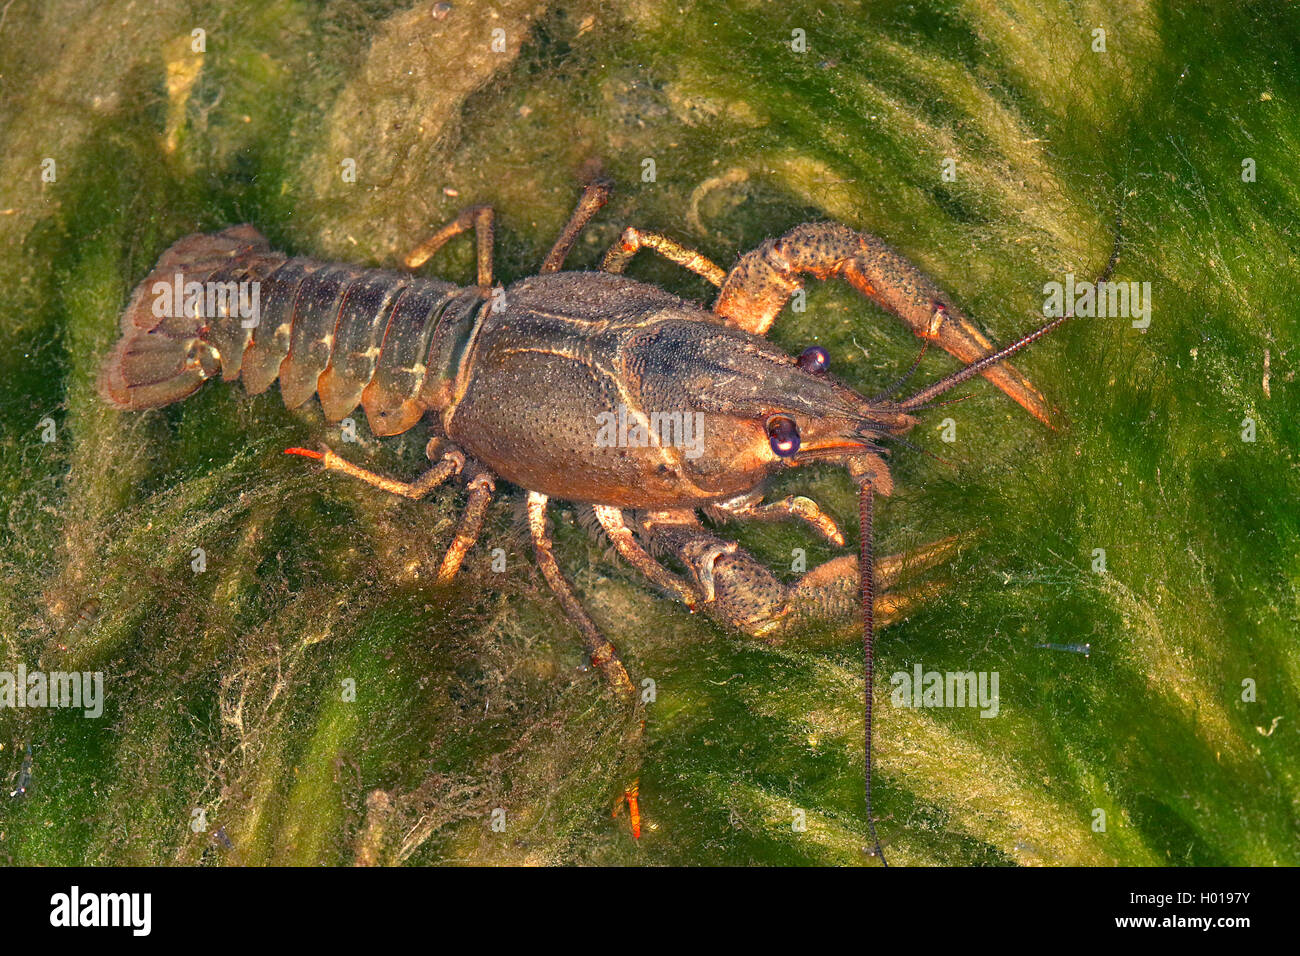 long-clawed crayfish (Astacus leptodactylus), on a stone covered with algae, Romania, Danube Delta Stock Photo